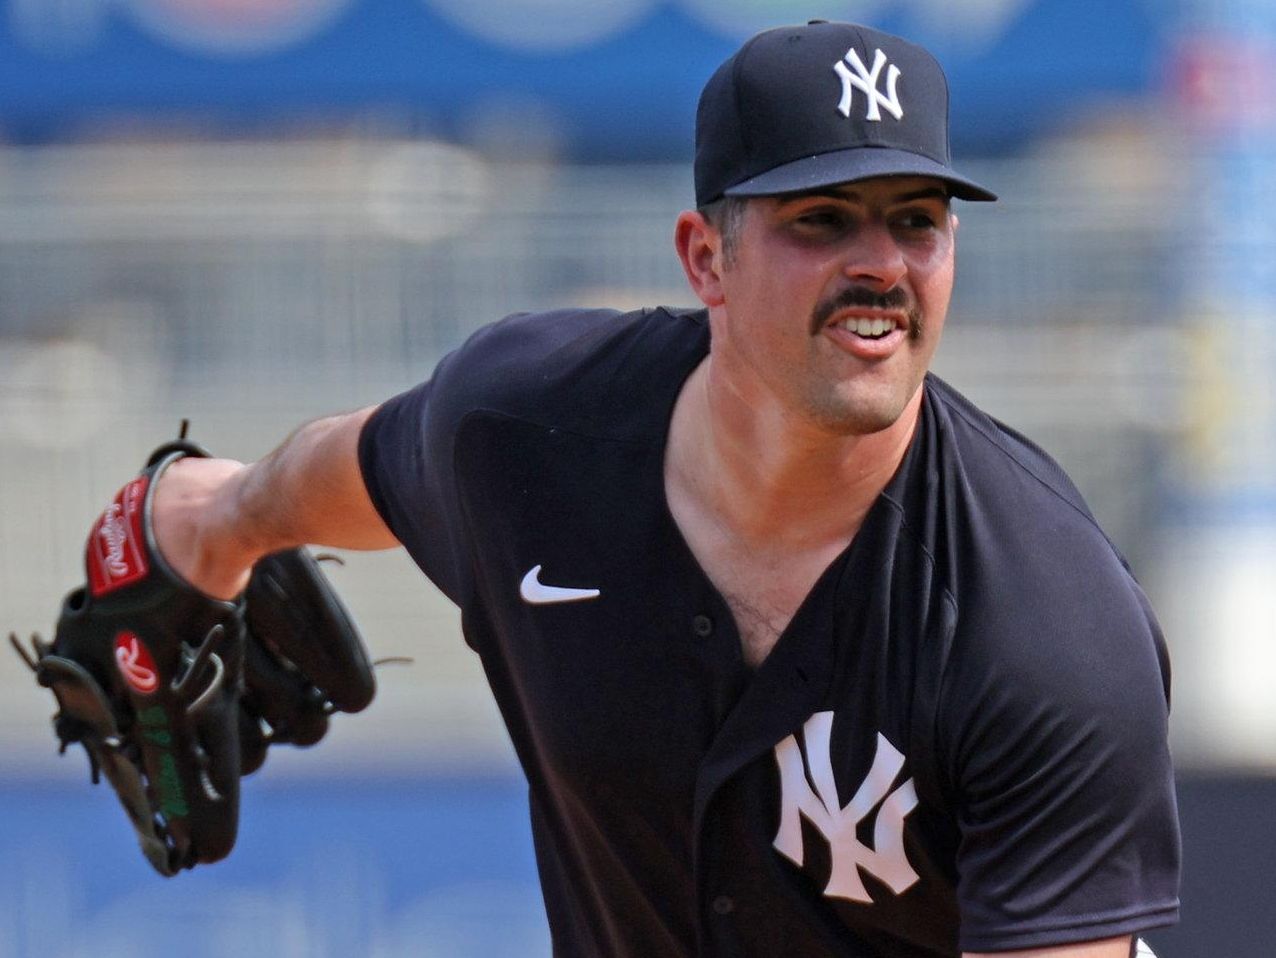 About Starting Pitcher Carlos Rodon Who The Yankees Want